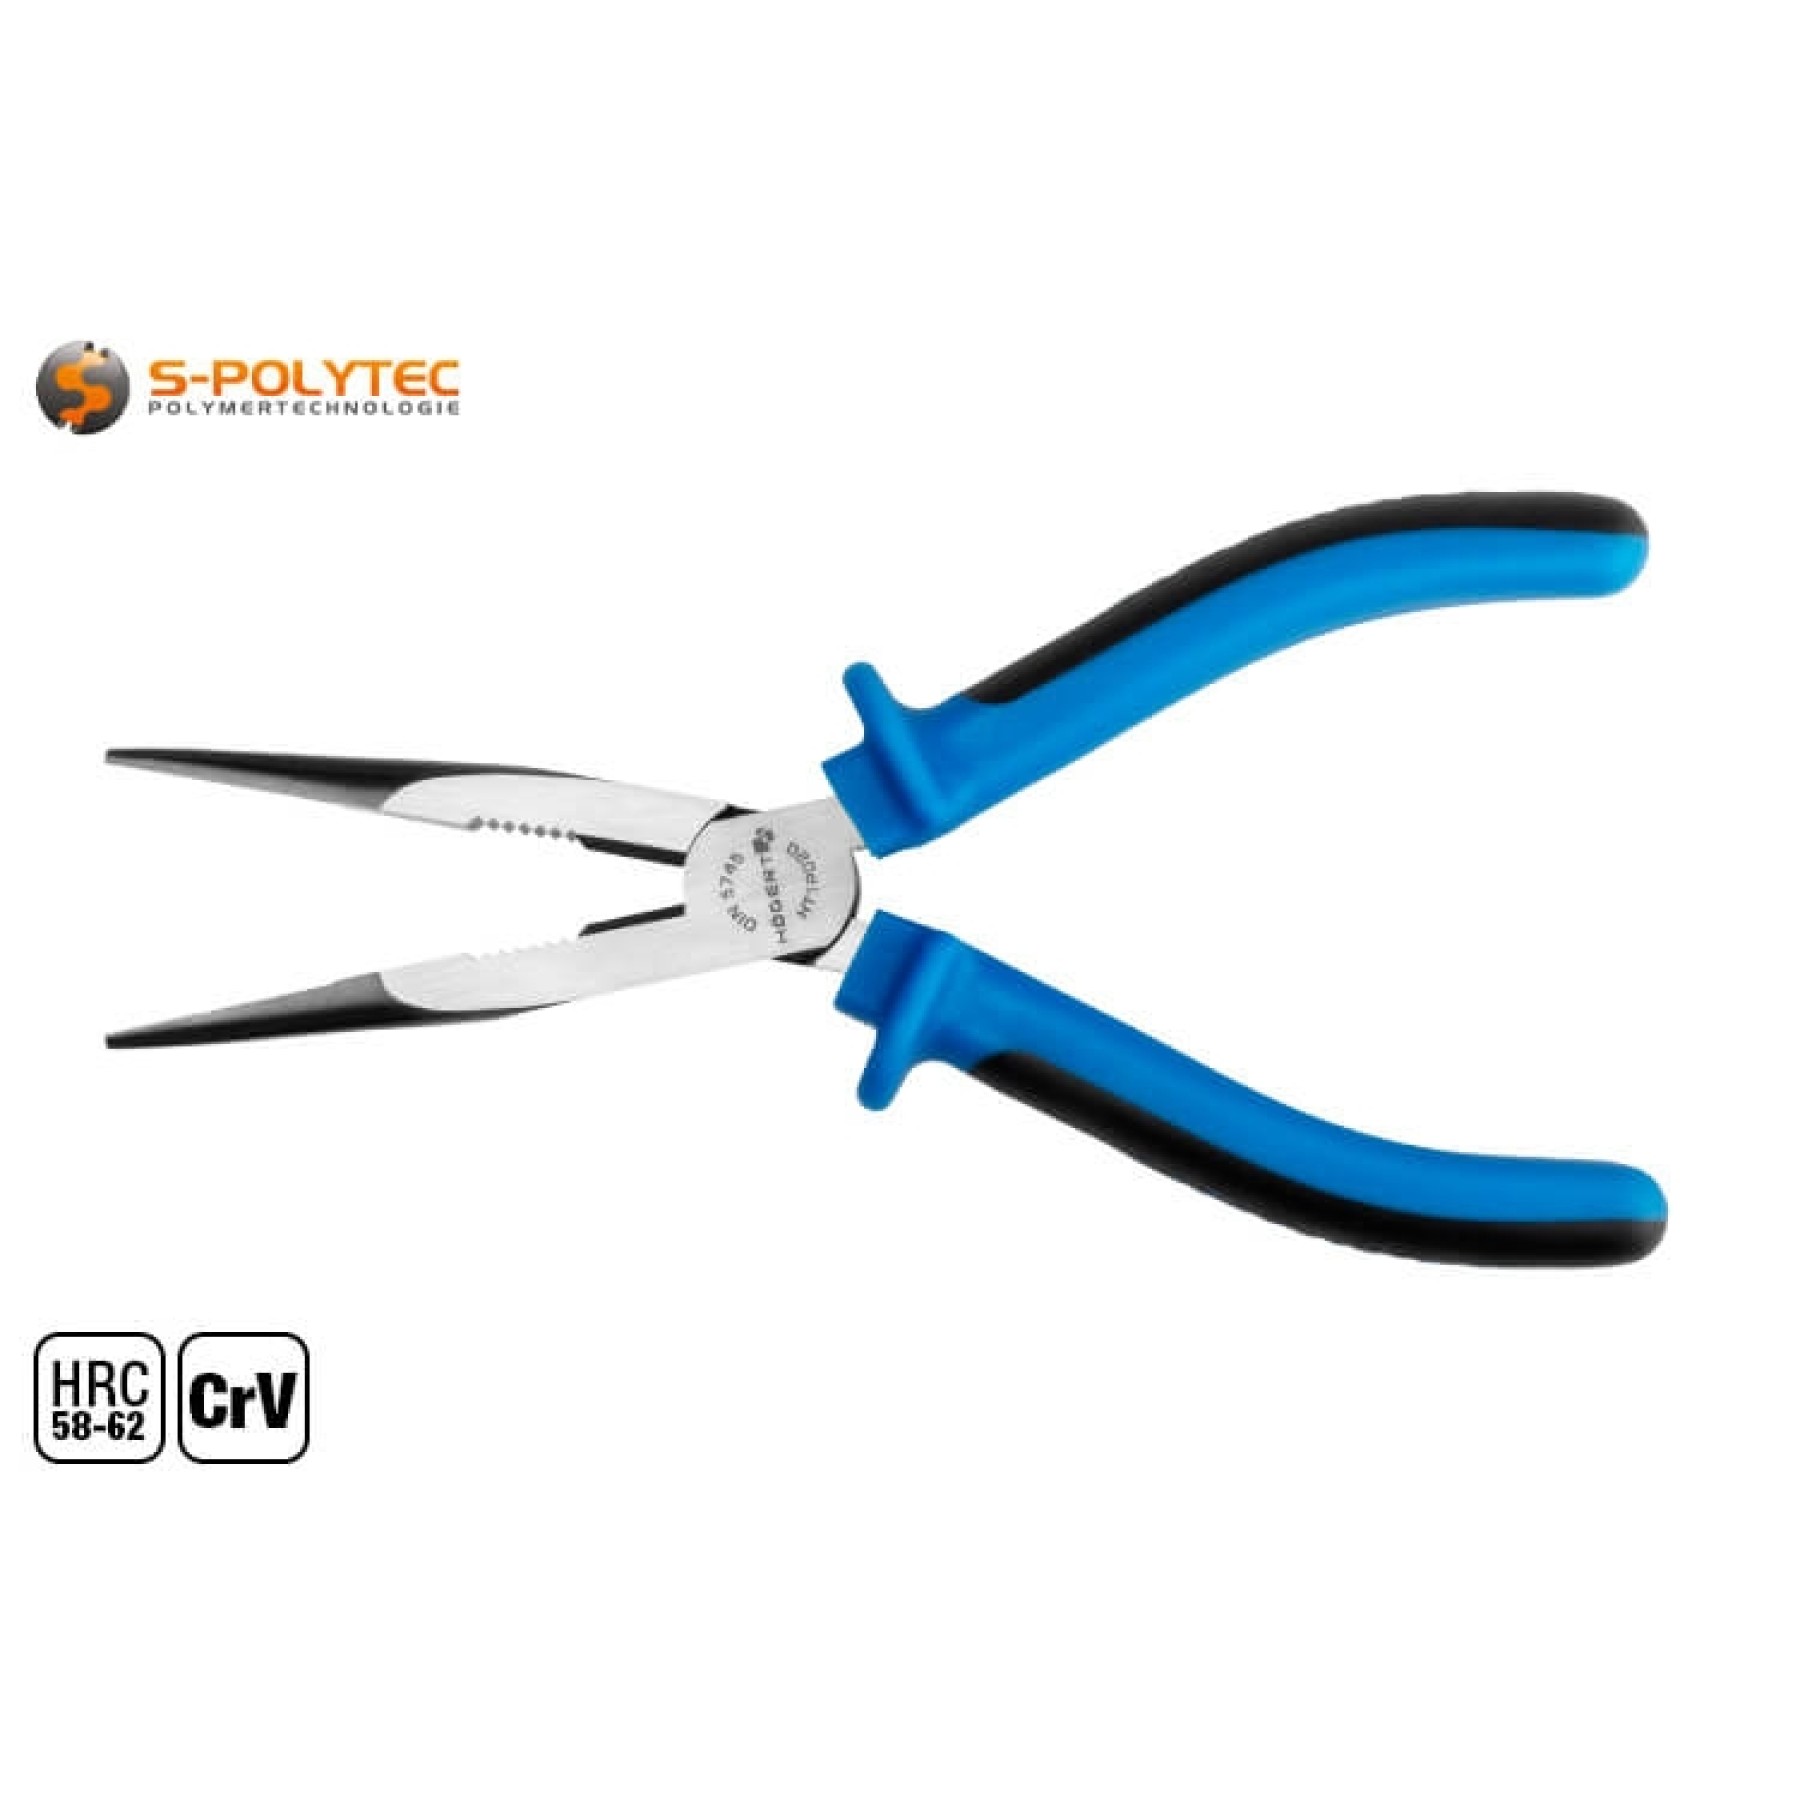 The high-quality flat nose pliers with straight tip are available in 160mm or 200mm overall length